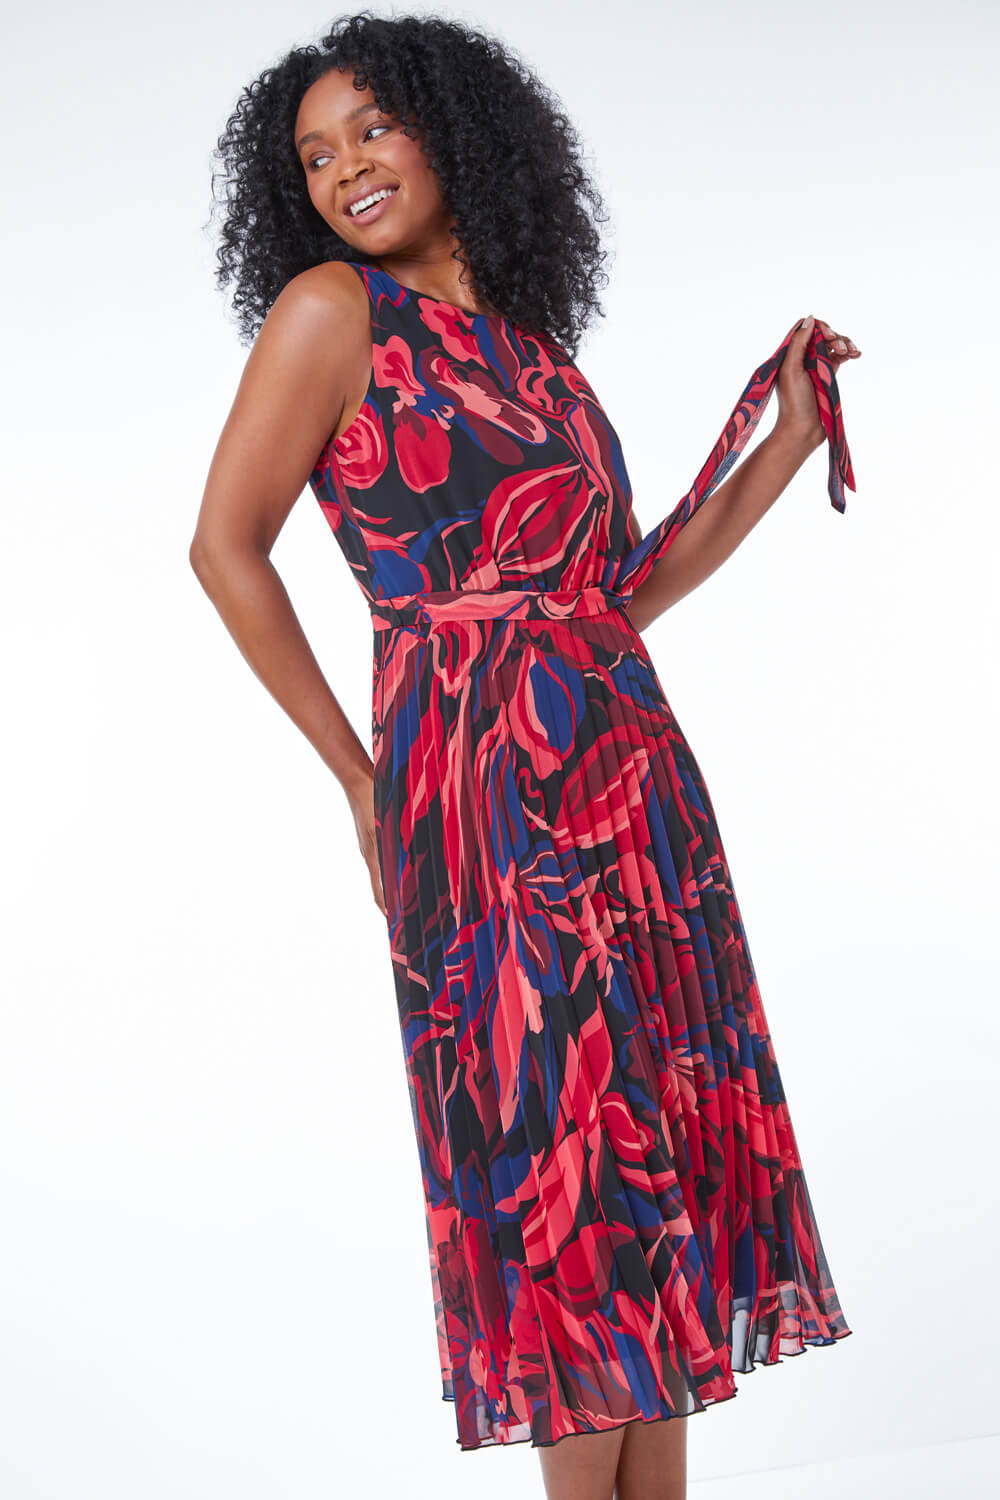 CORAL Petite Floral Pleated Midi Dress, Image 2 of 5